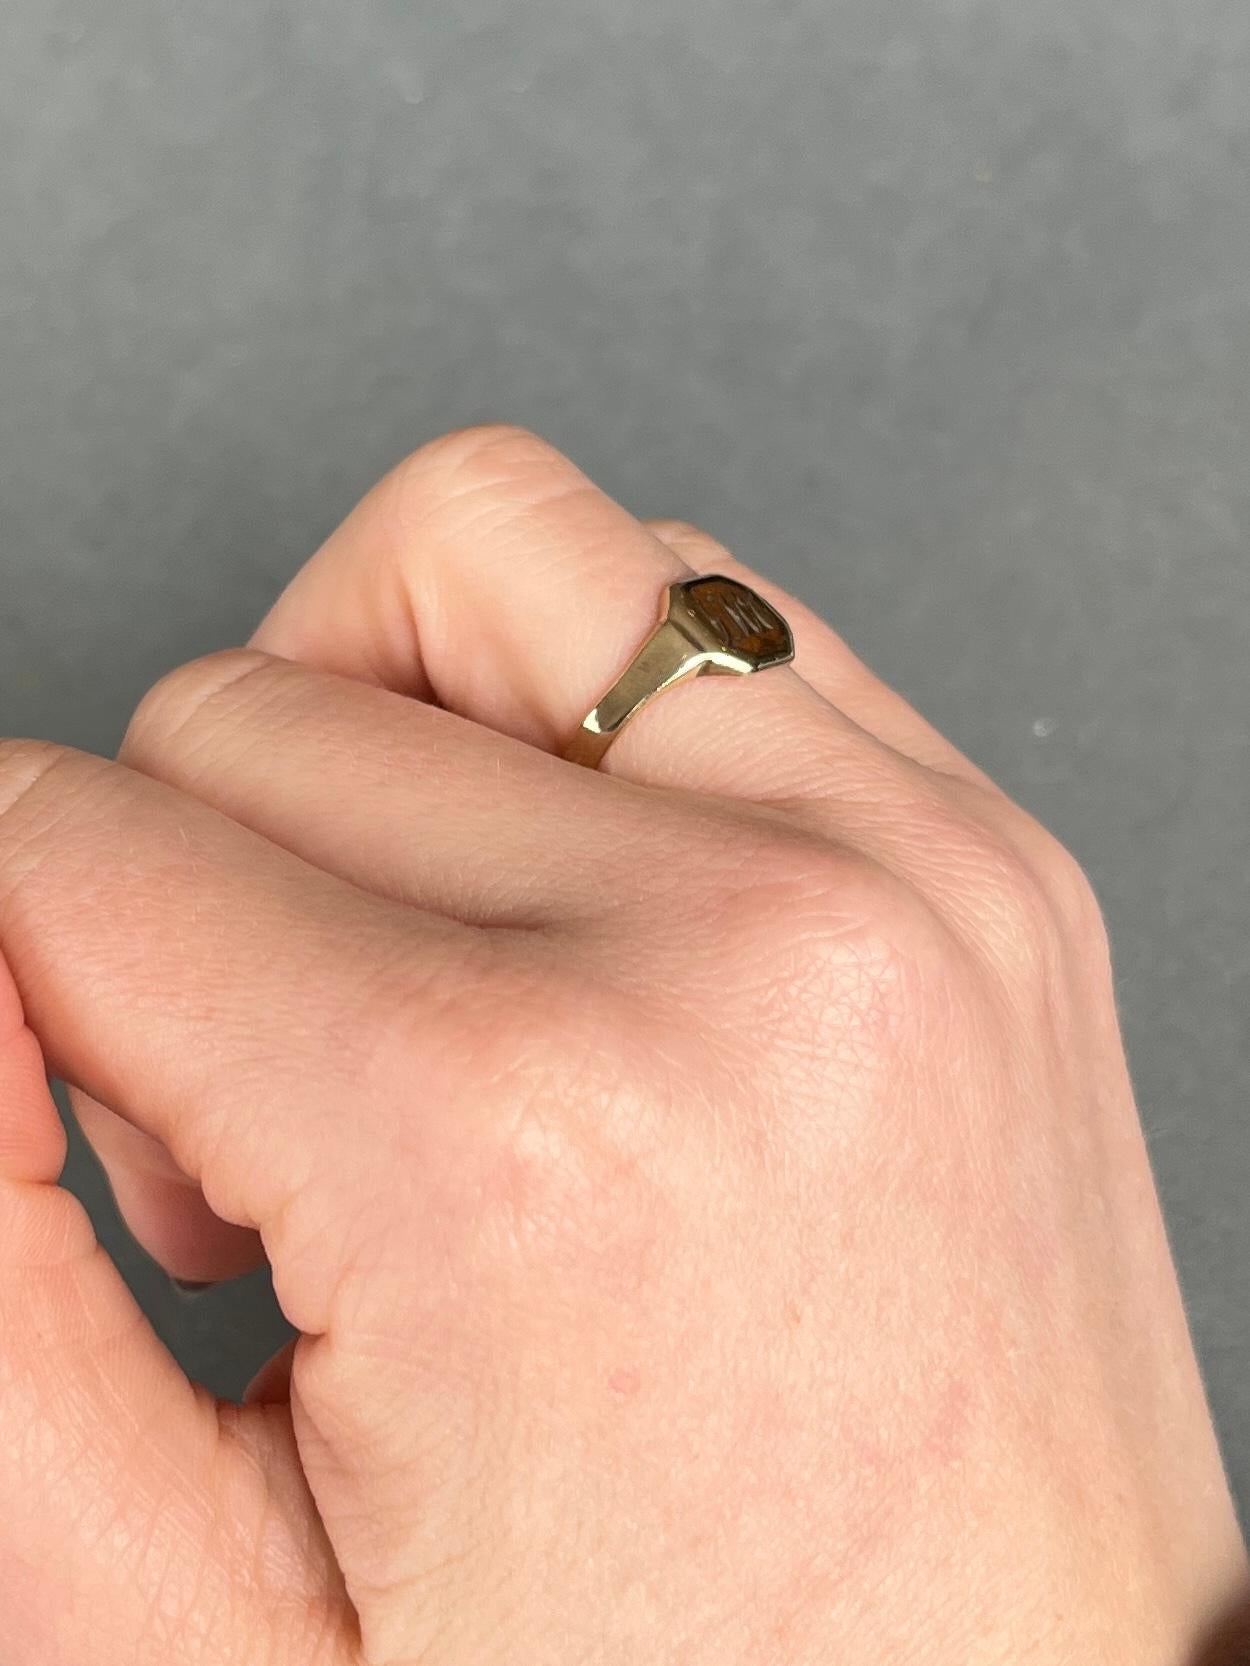 This ring is modelled in glossy 9 carat gold and has engraving on the front. The letters read 'VMC'. 

RIng Size: L 1/2 or 6
Face Width: 8mm 

Weight: 2.4g